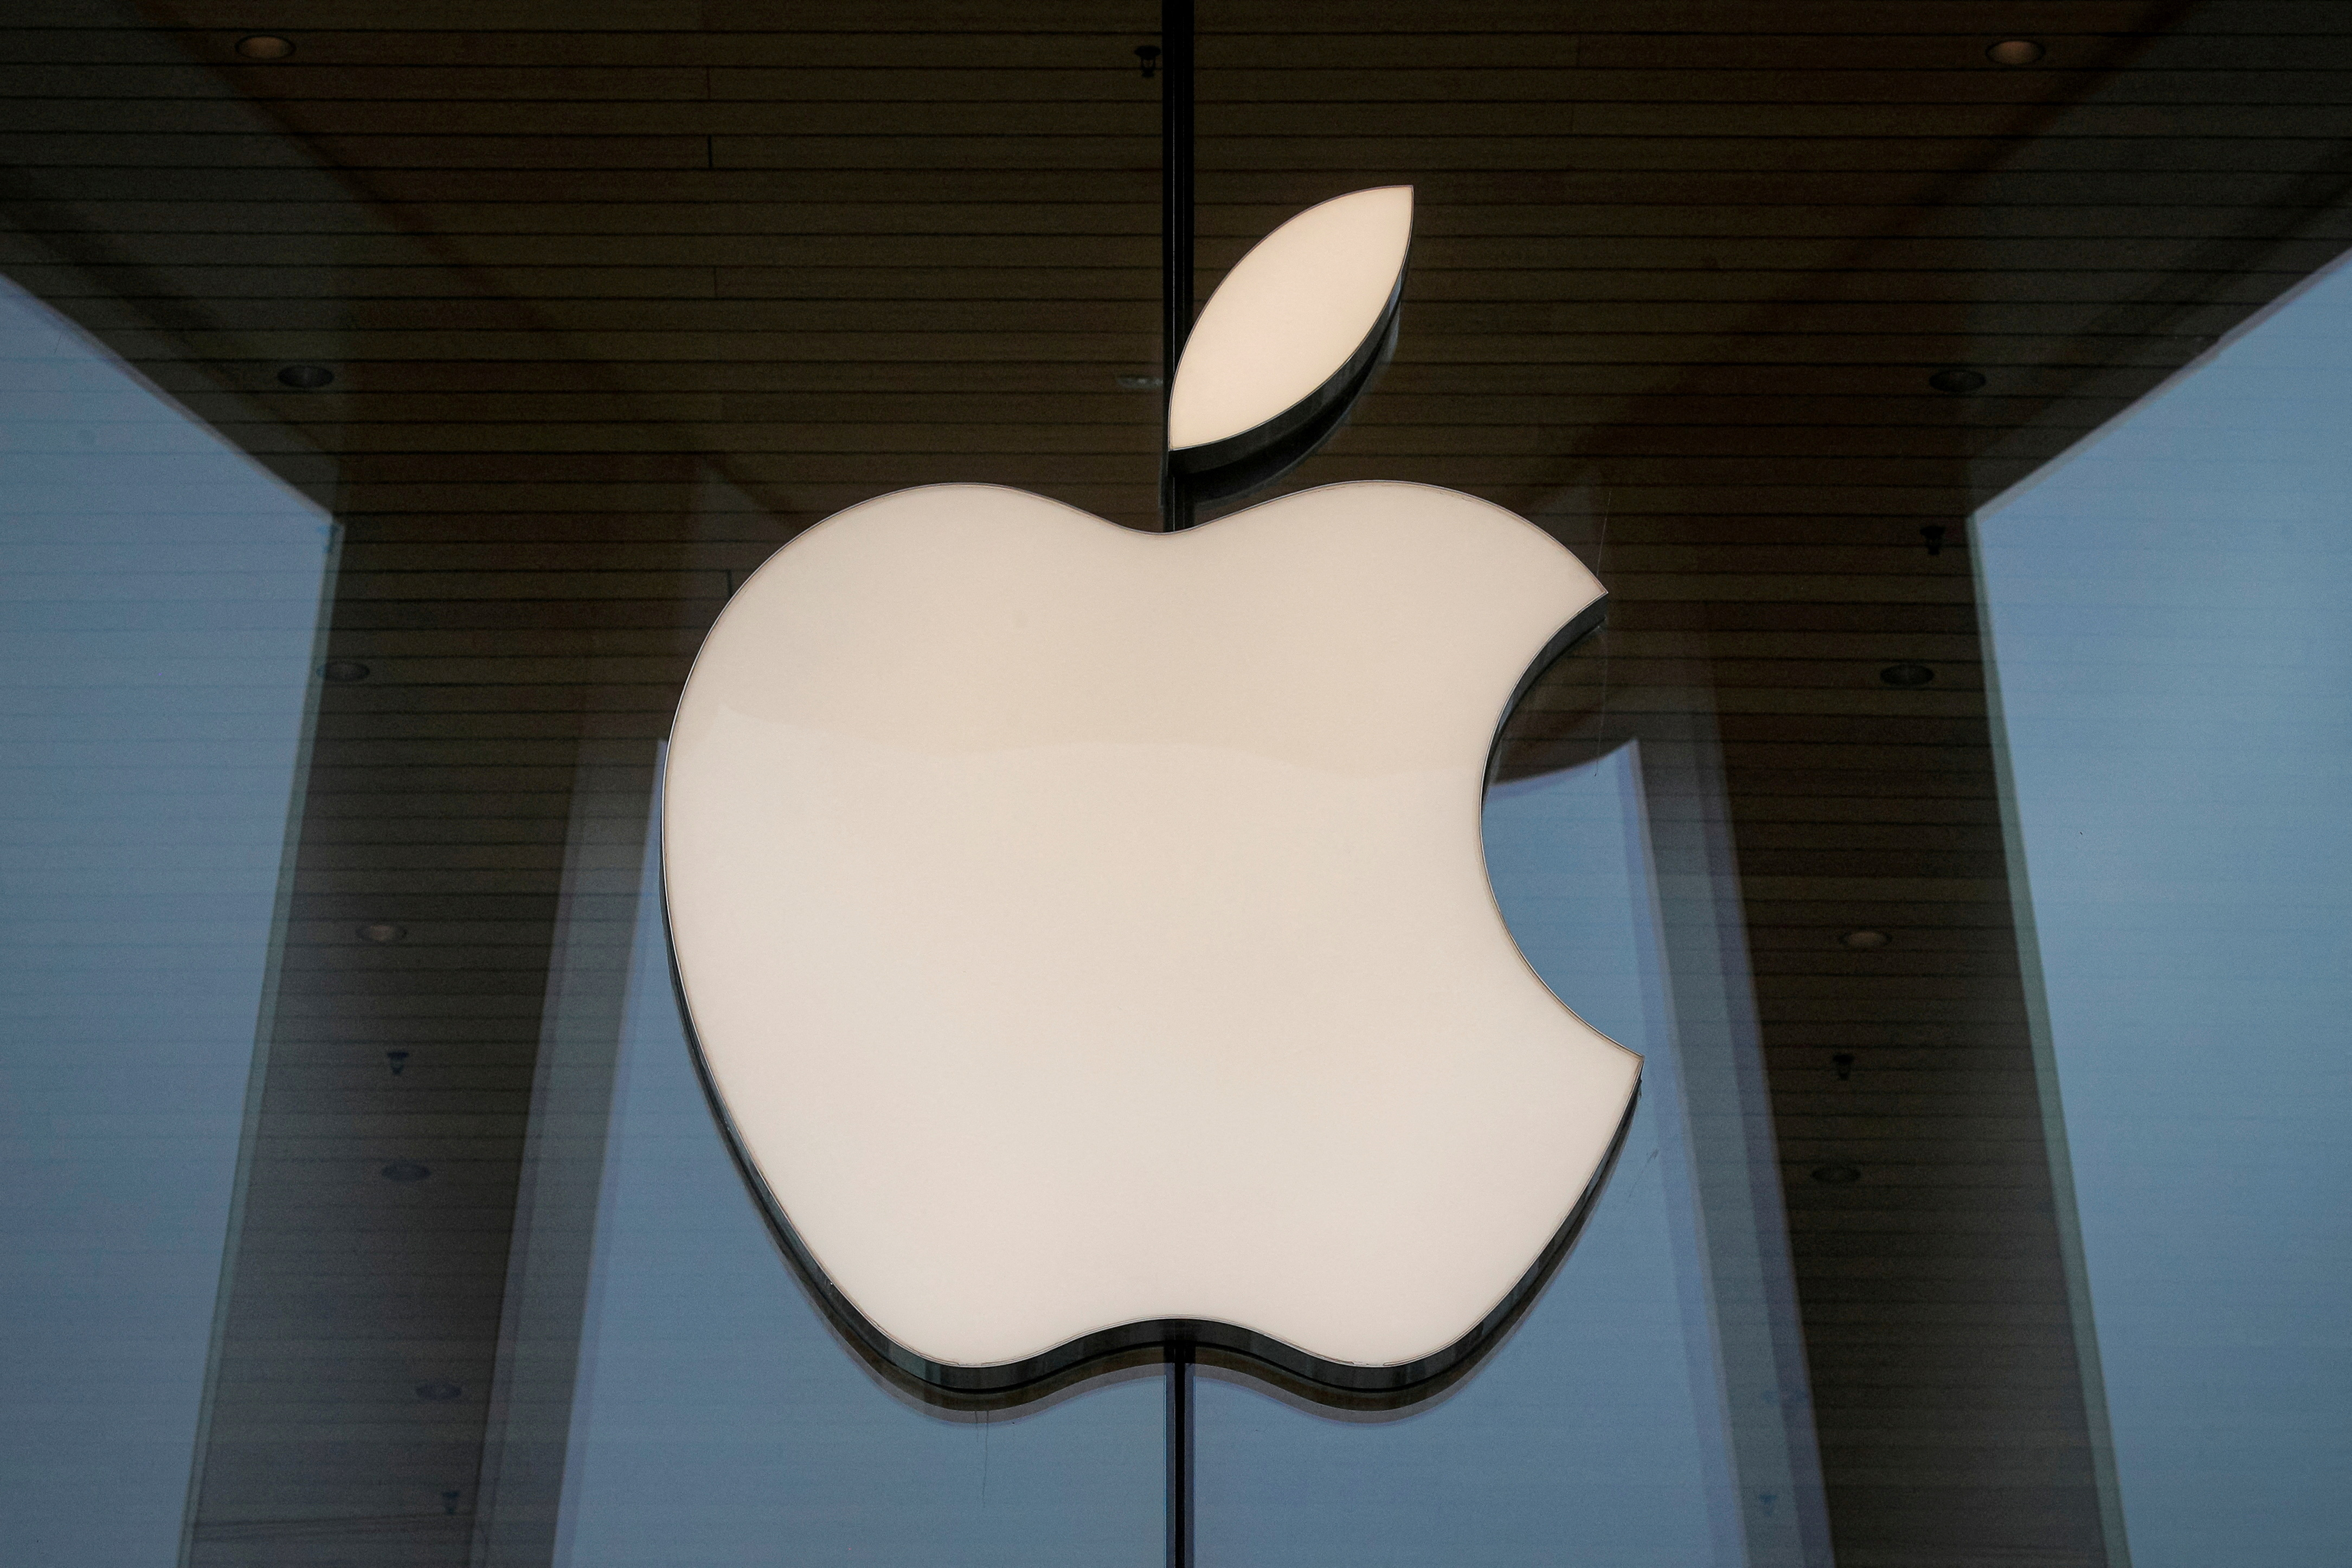 The Apple logo is seen at an Apple Store in Brooklyn, New York